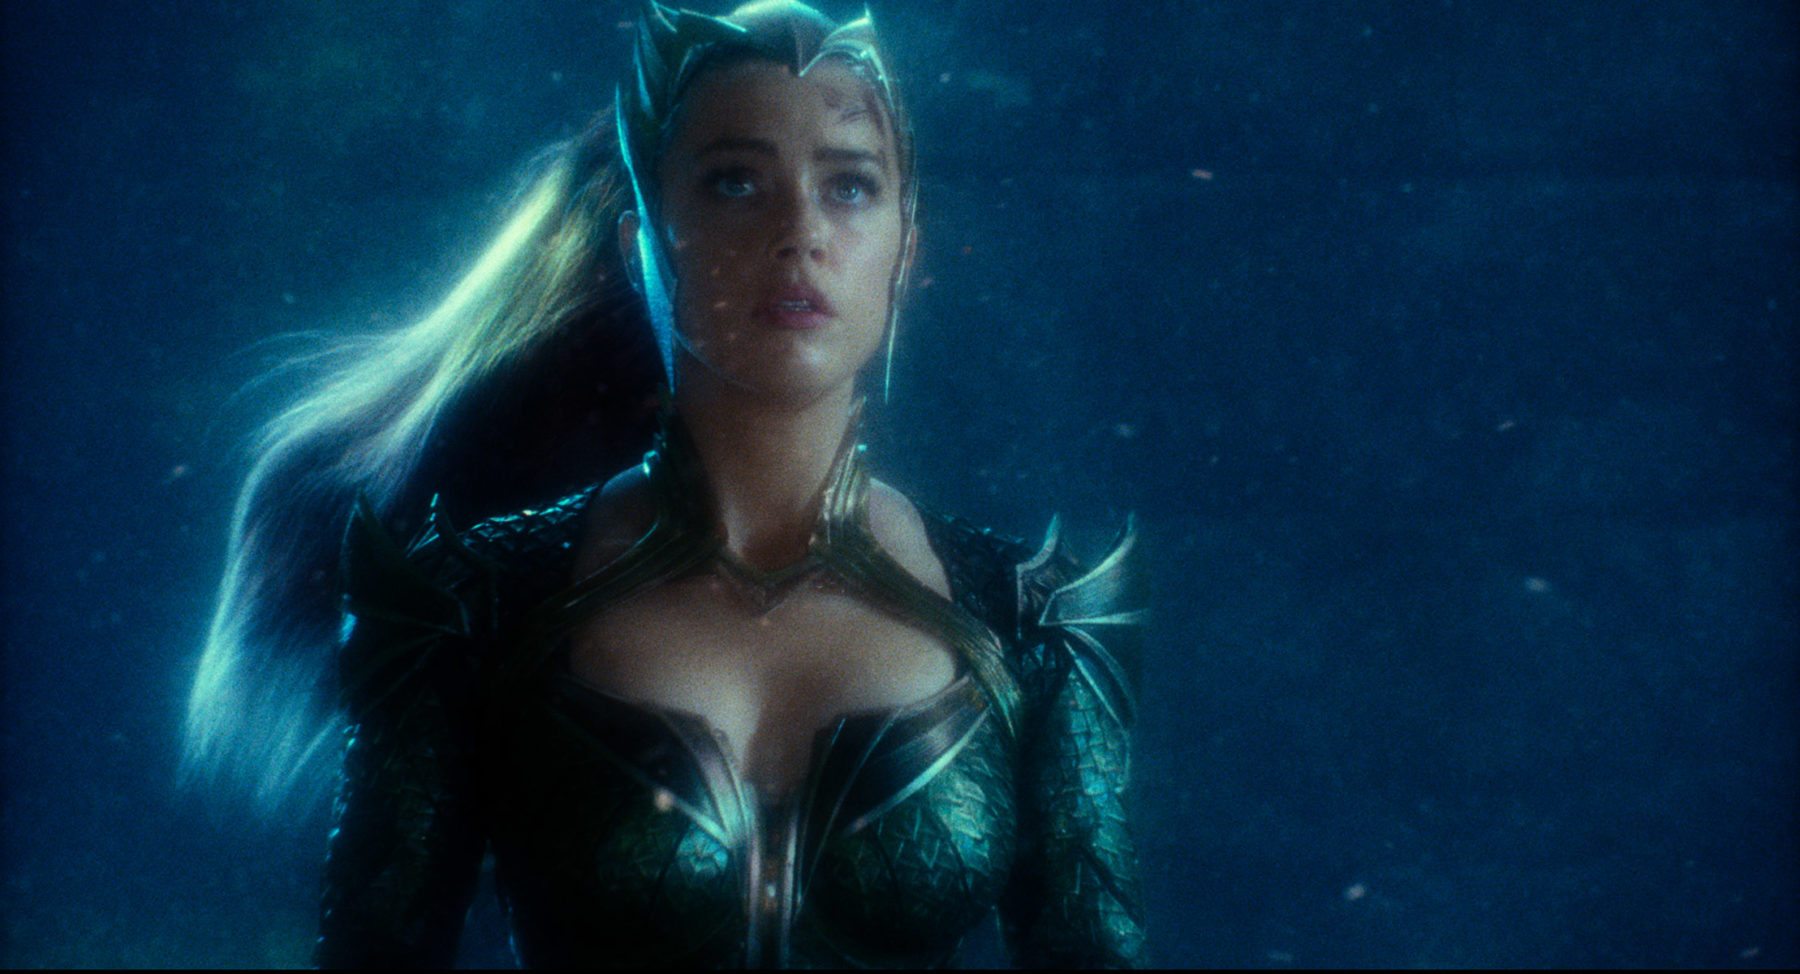 New image of Amber Heard's Mera from Justice League